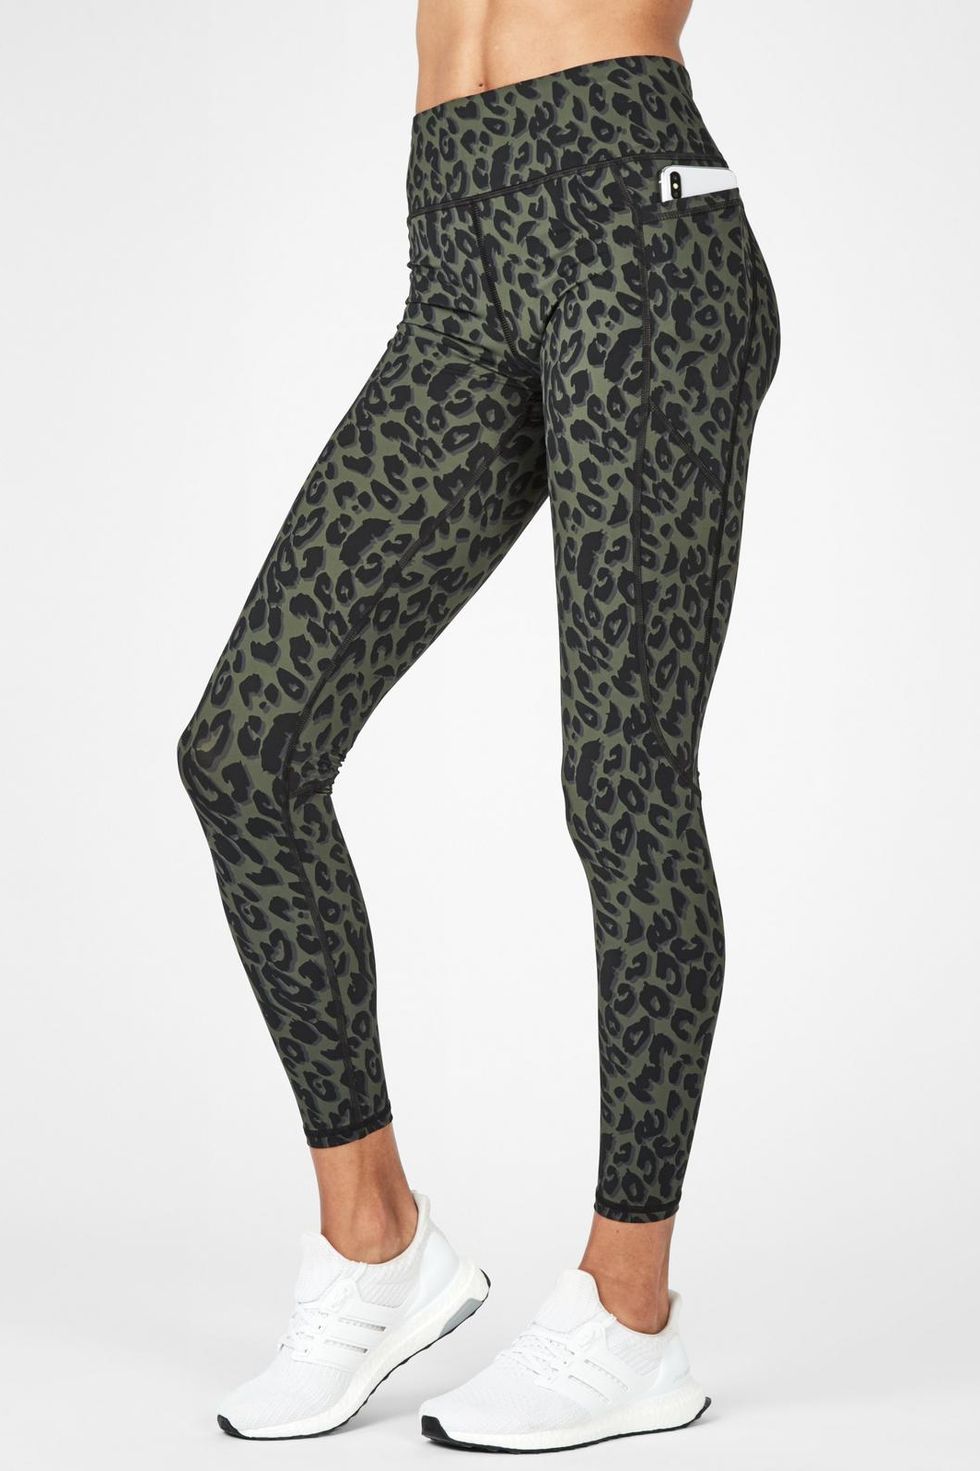 9 Best Leggings With Pockets - Leggings With Pockets for Phone